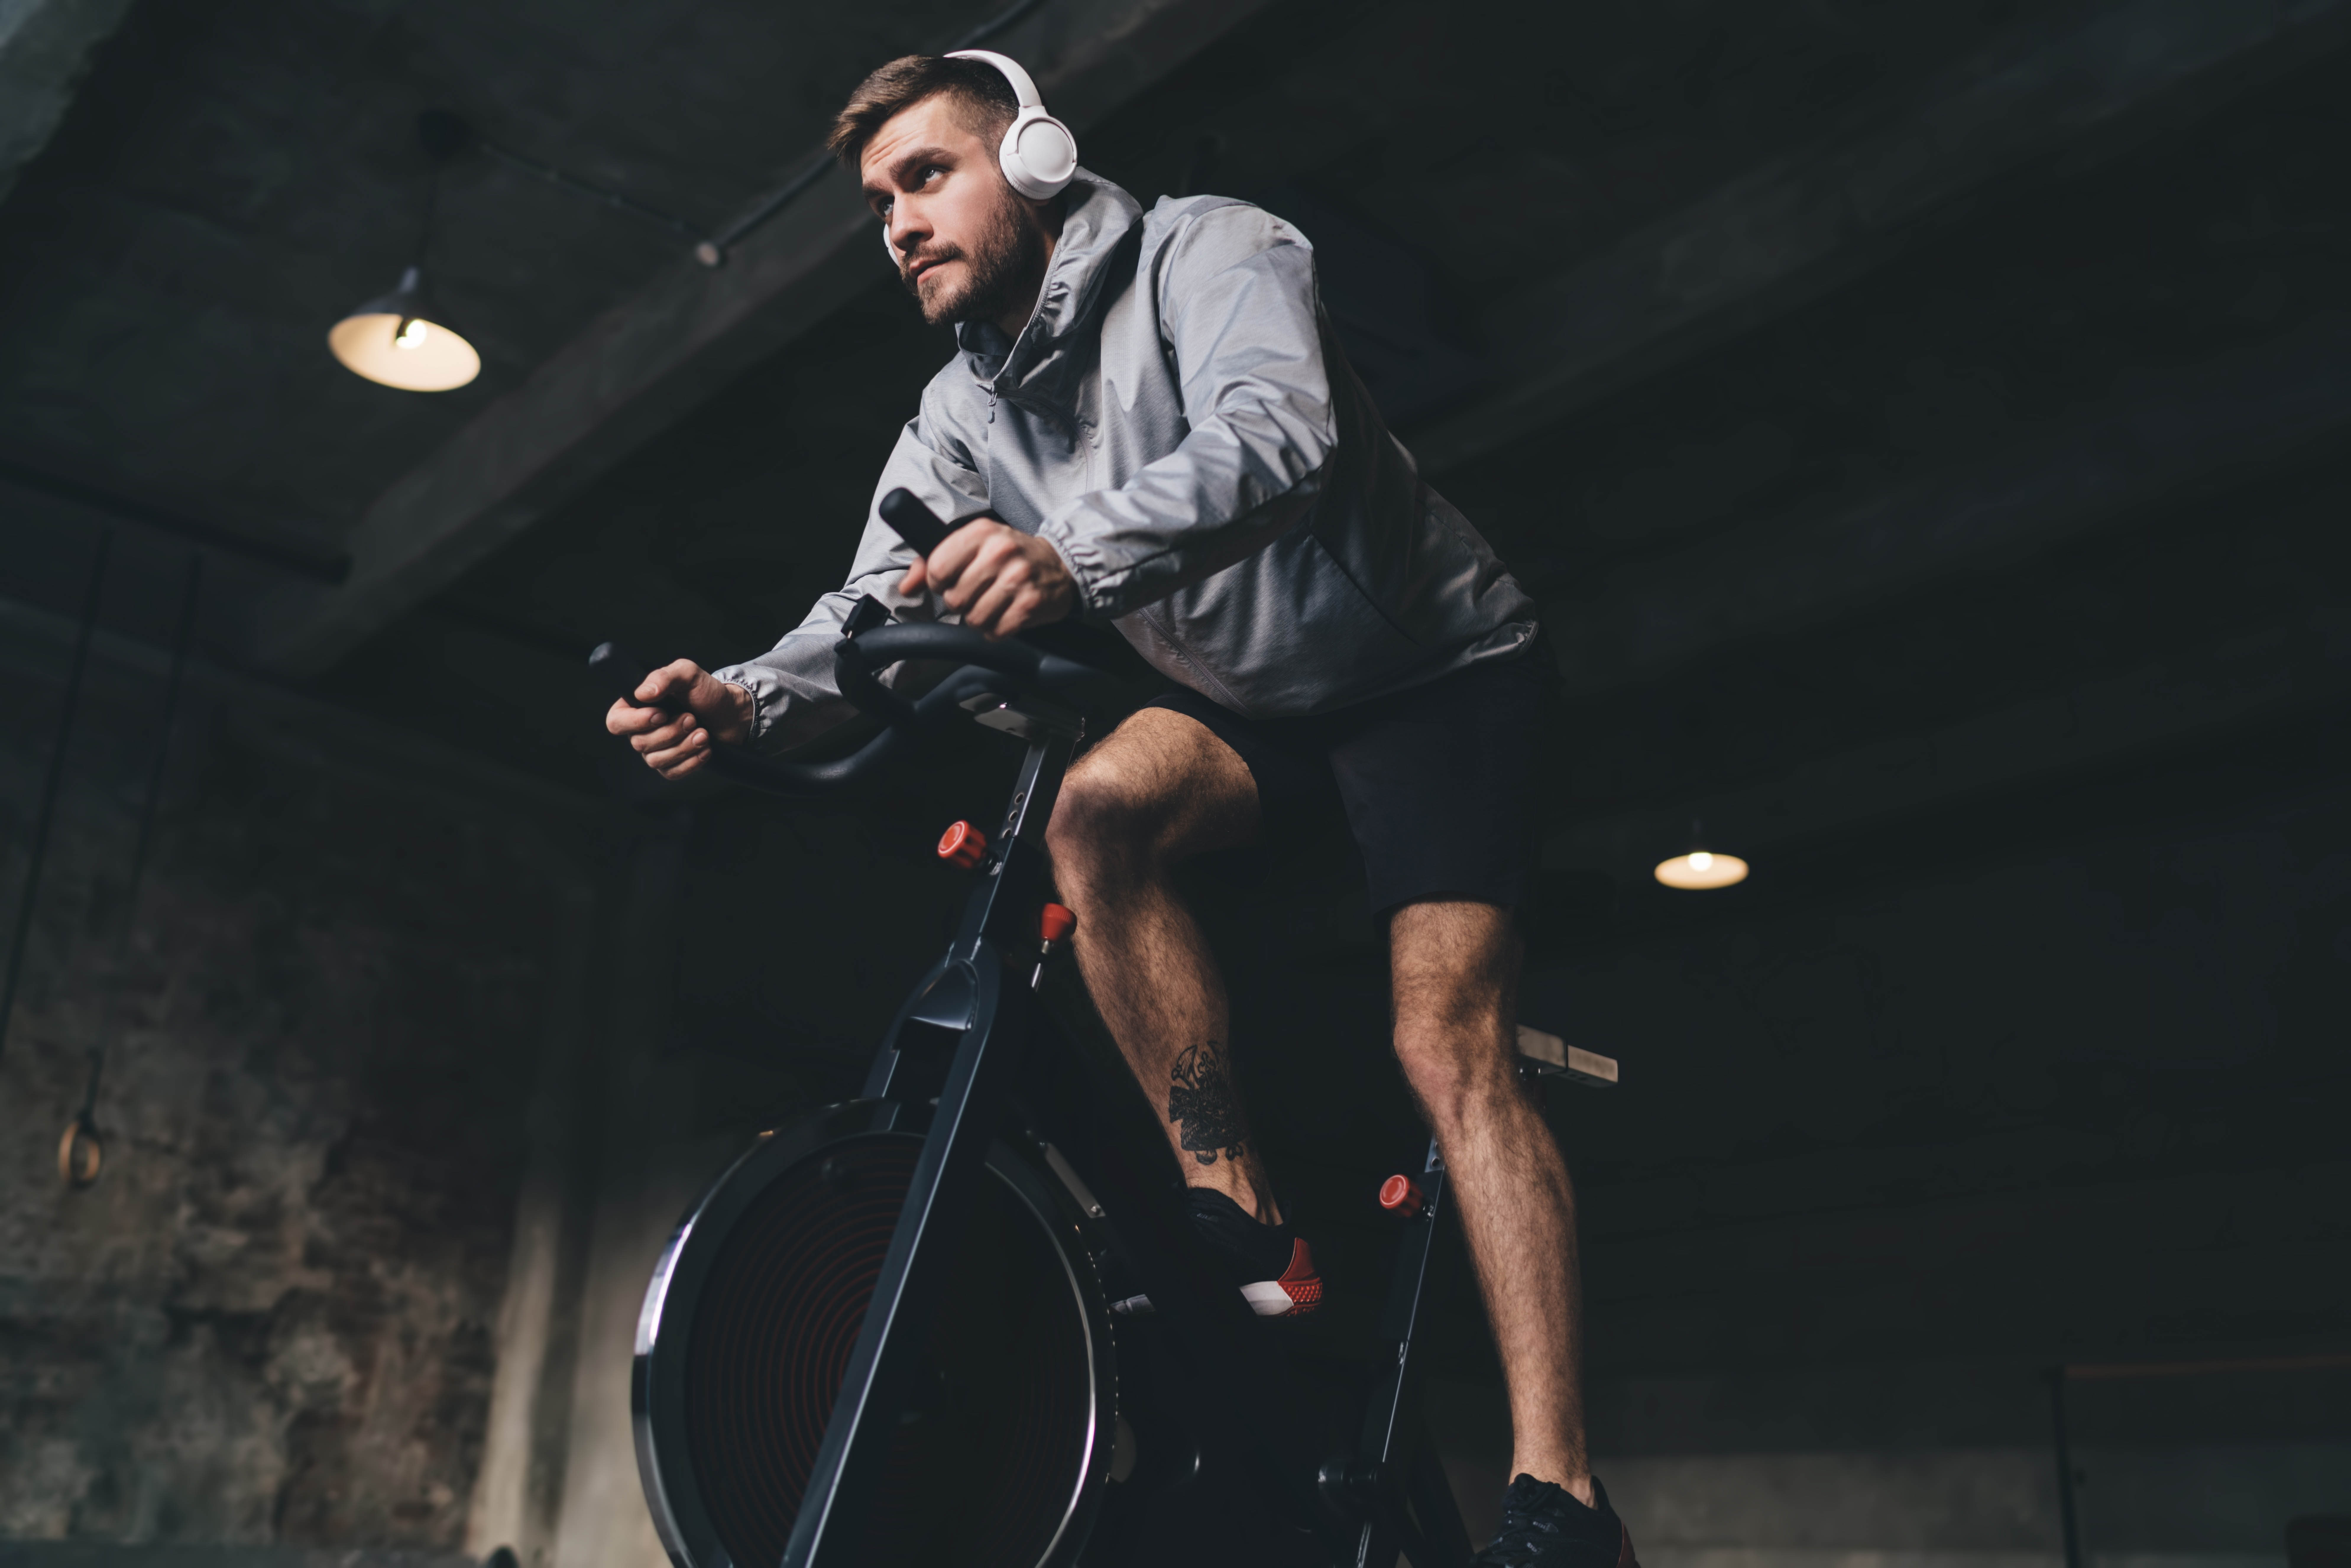 Man with headphones on, working out on a stationary bike in a gym